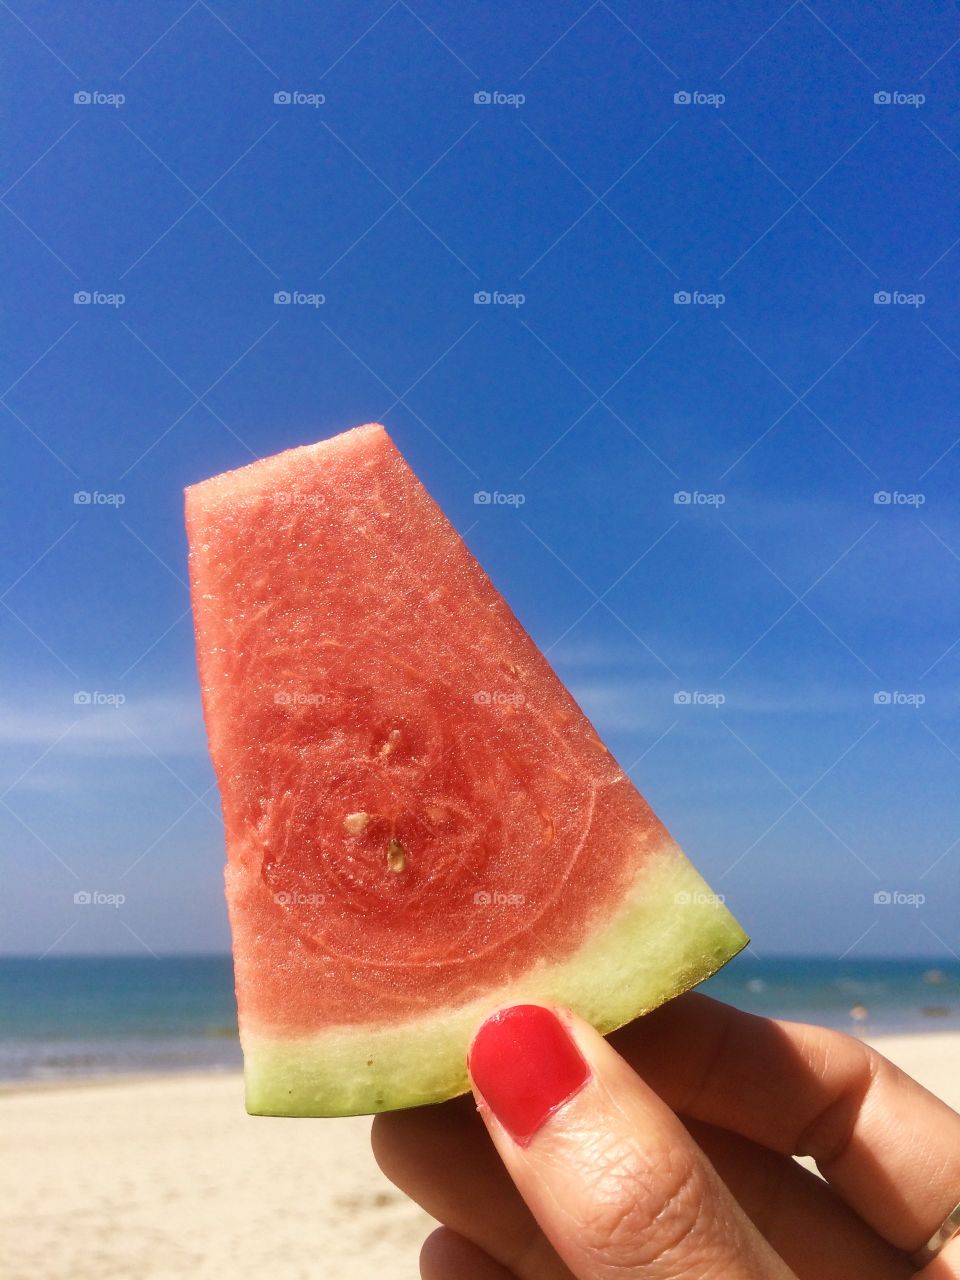 Watermelon and blue sky